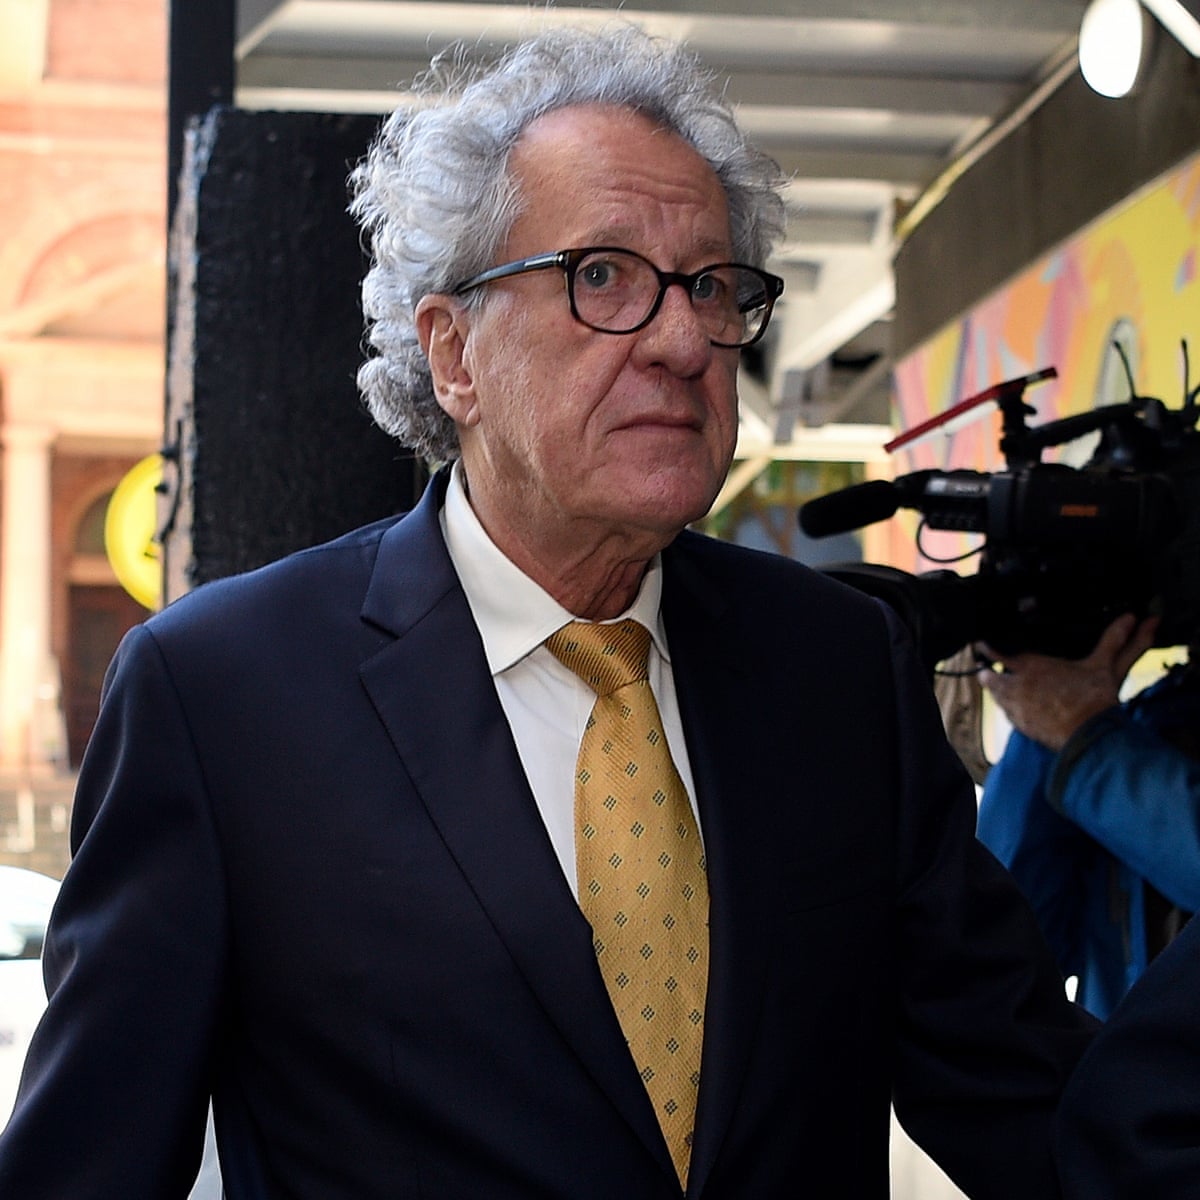 geoffrey Rush Case Daily Telegraph And Nationwide News Lose Defamation Appeal Against Actor Geoffrey Rush The Guardian